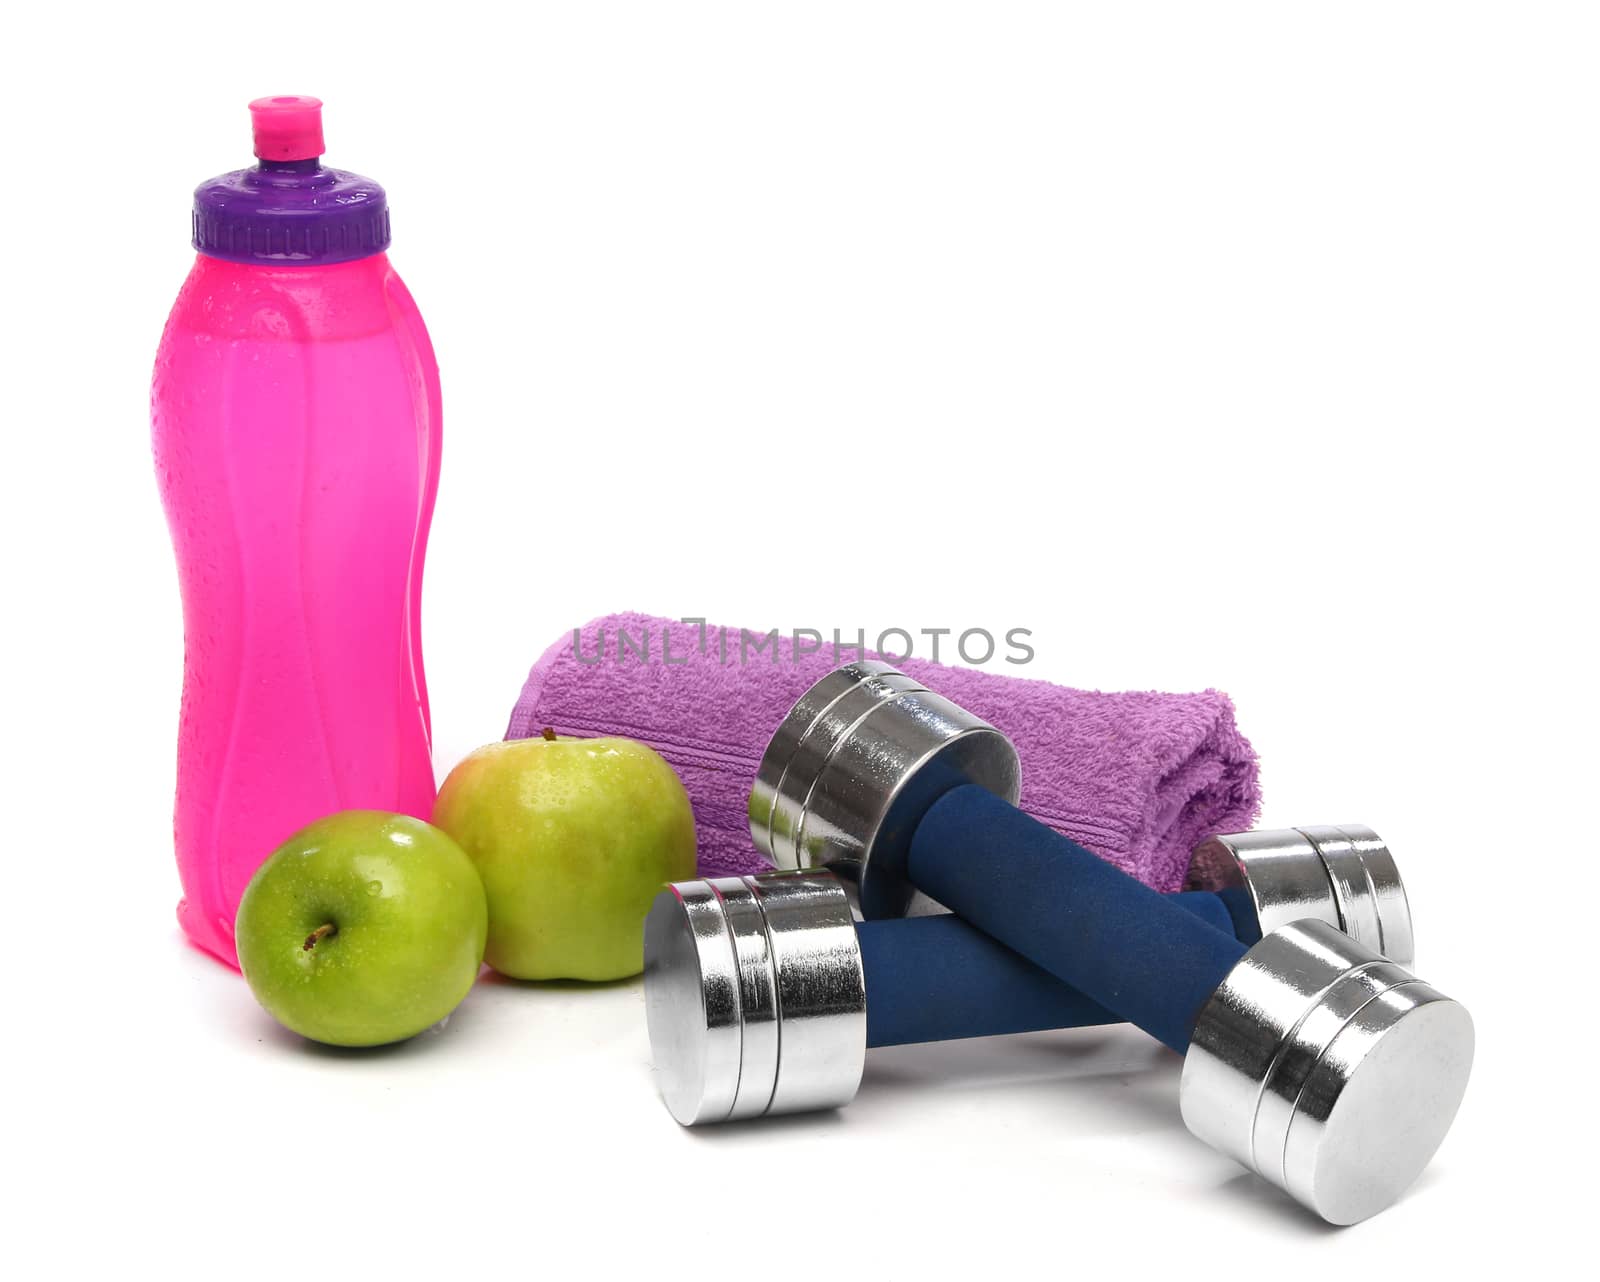 Fitness concept with a bottle of water, a towel, dumbbells and apples by Erdosain